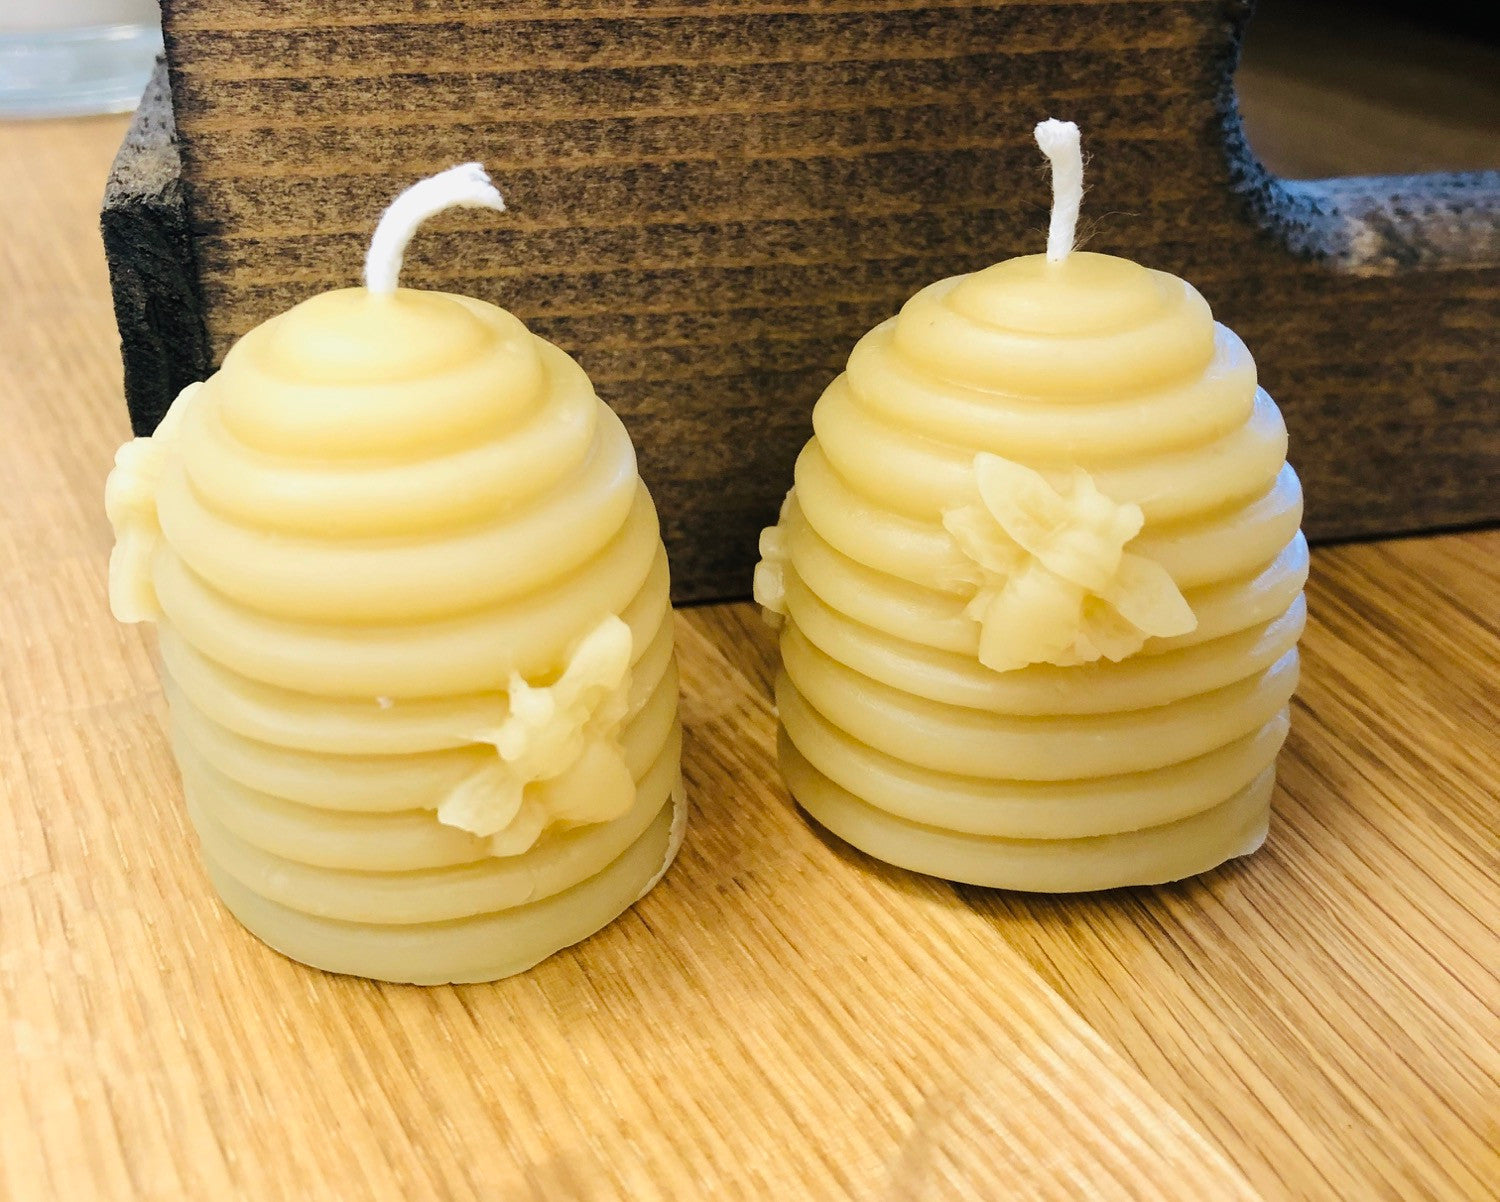 100% Pure Natural Yellow Beeswax Votive Hives